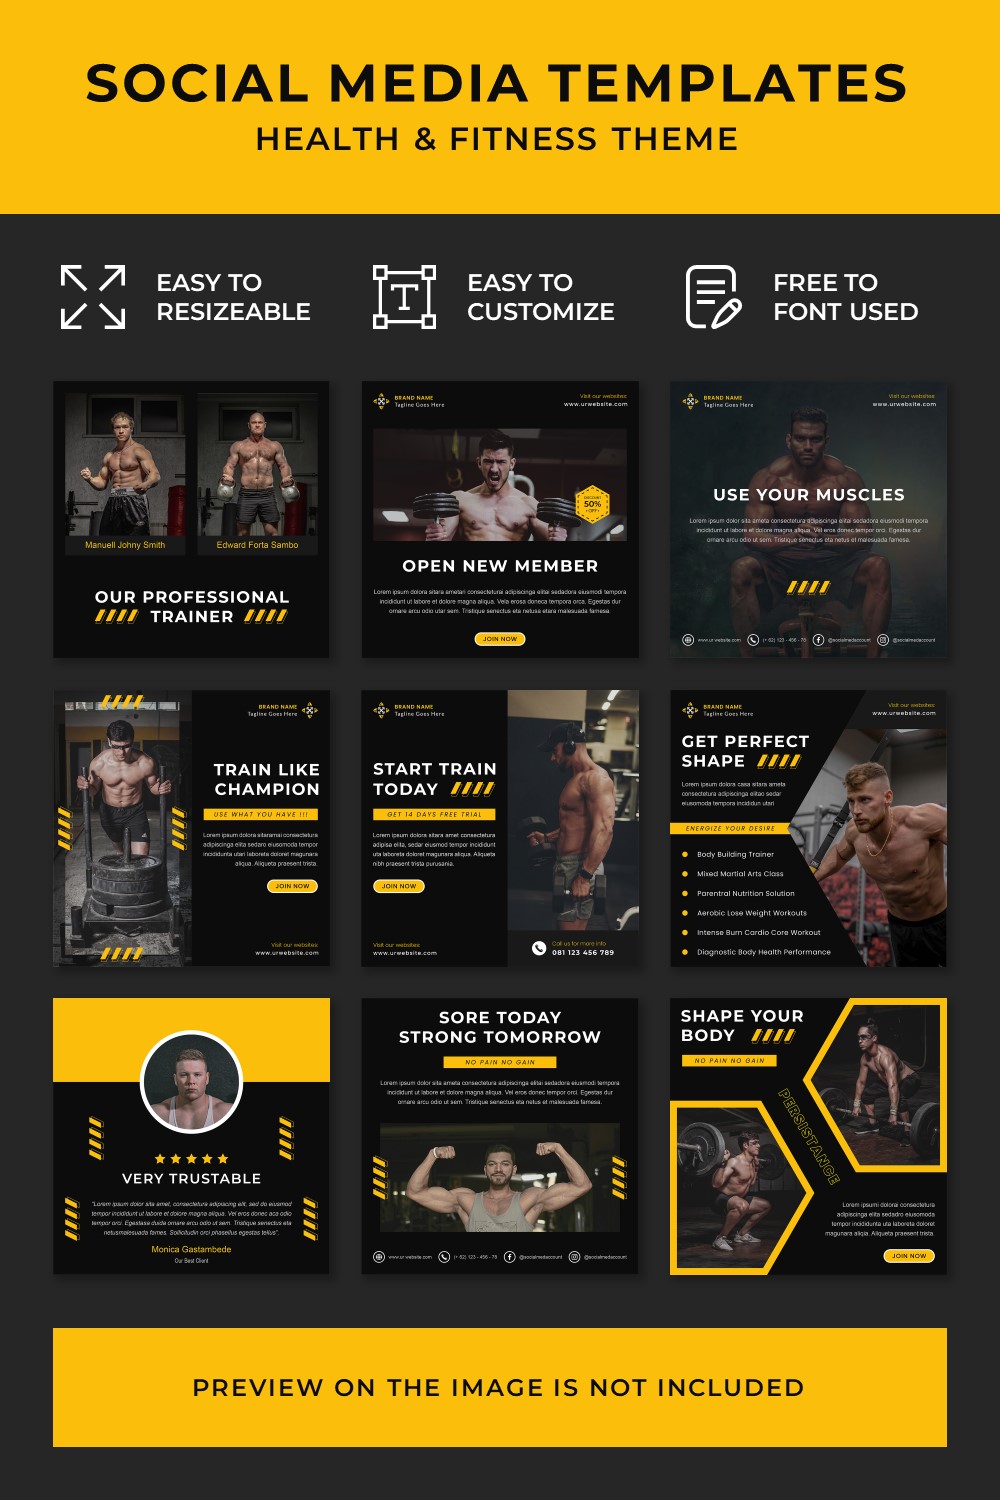 Fitness and Health Social Media Templates pinterest image.